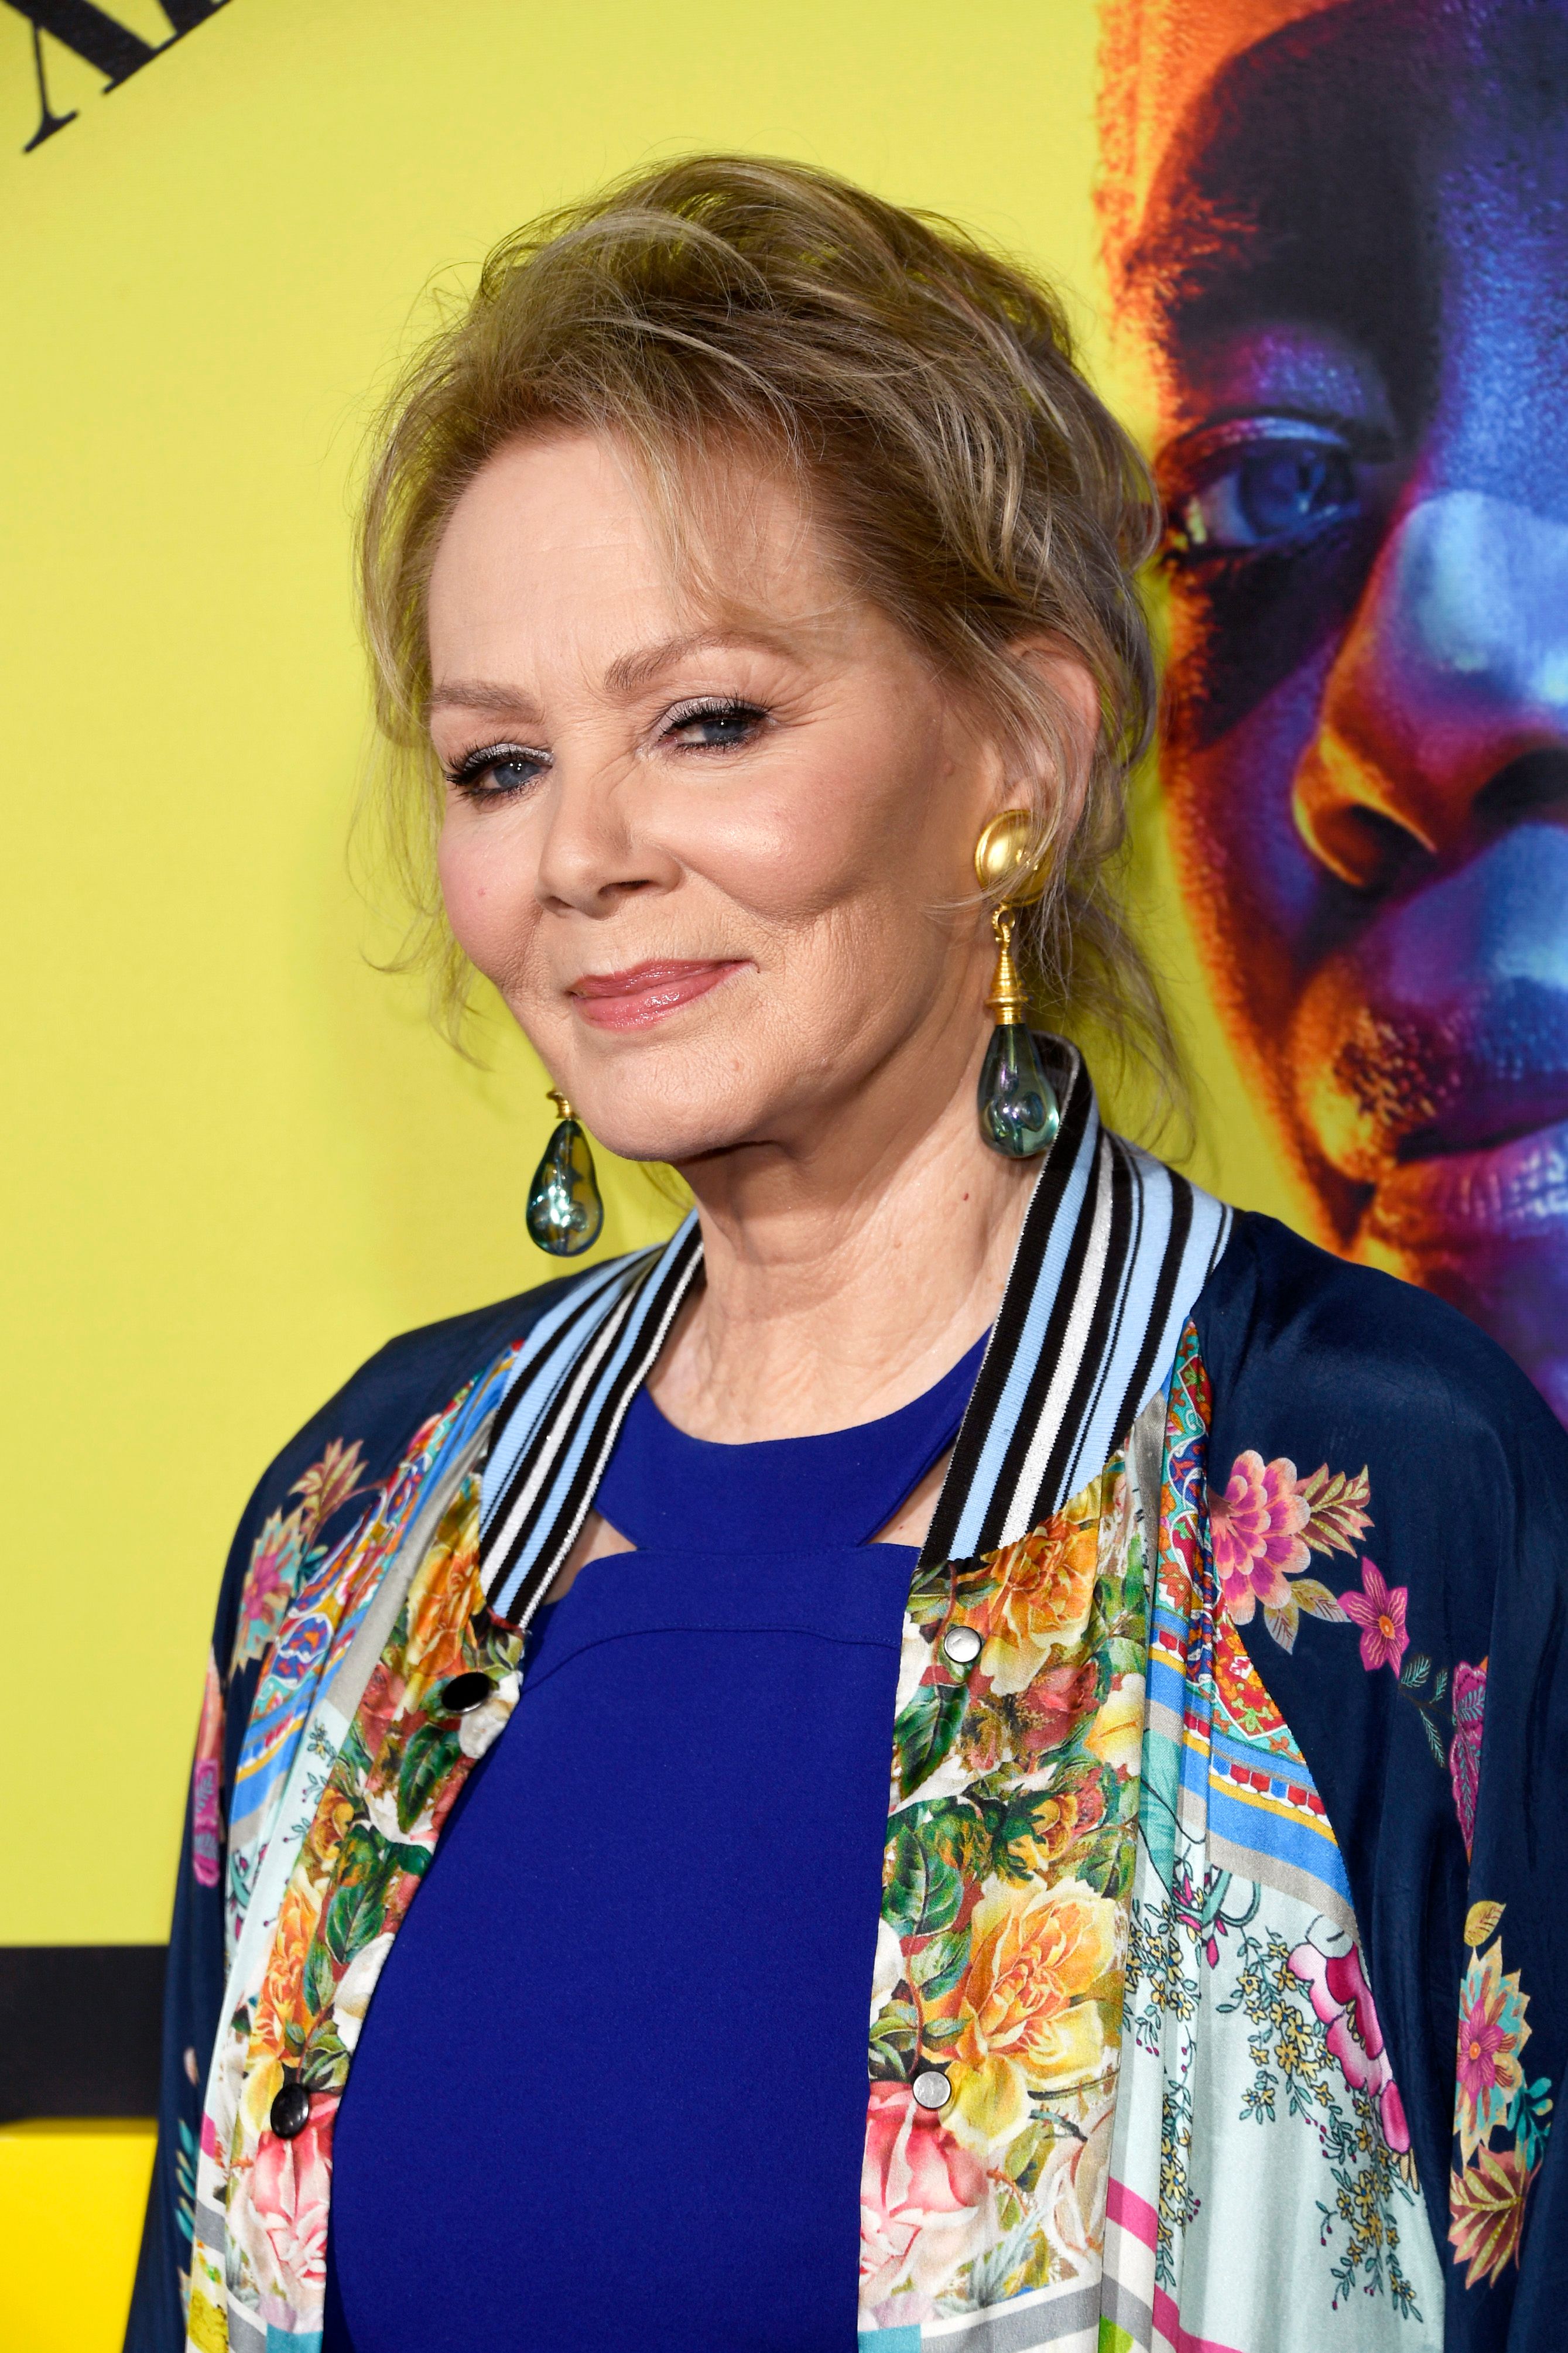 Jean Smart at the premiere of HBO's "Watchmen" at The Cinerama Dome on October 14, 2019 in Los Angeles, California | Photo: Getty Images